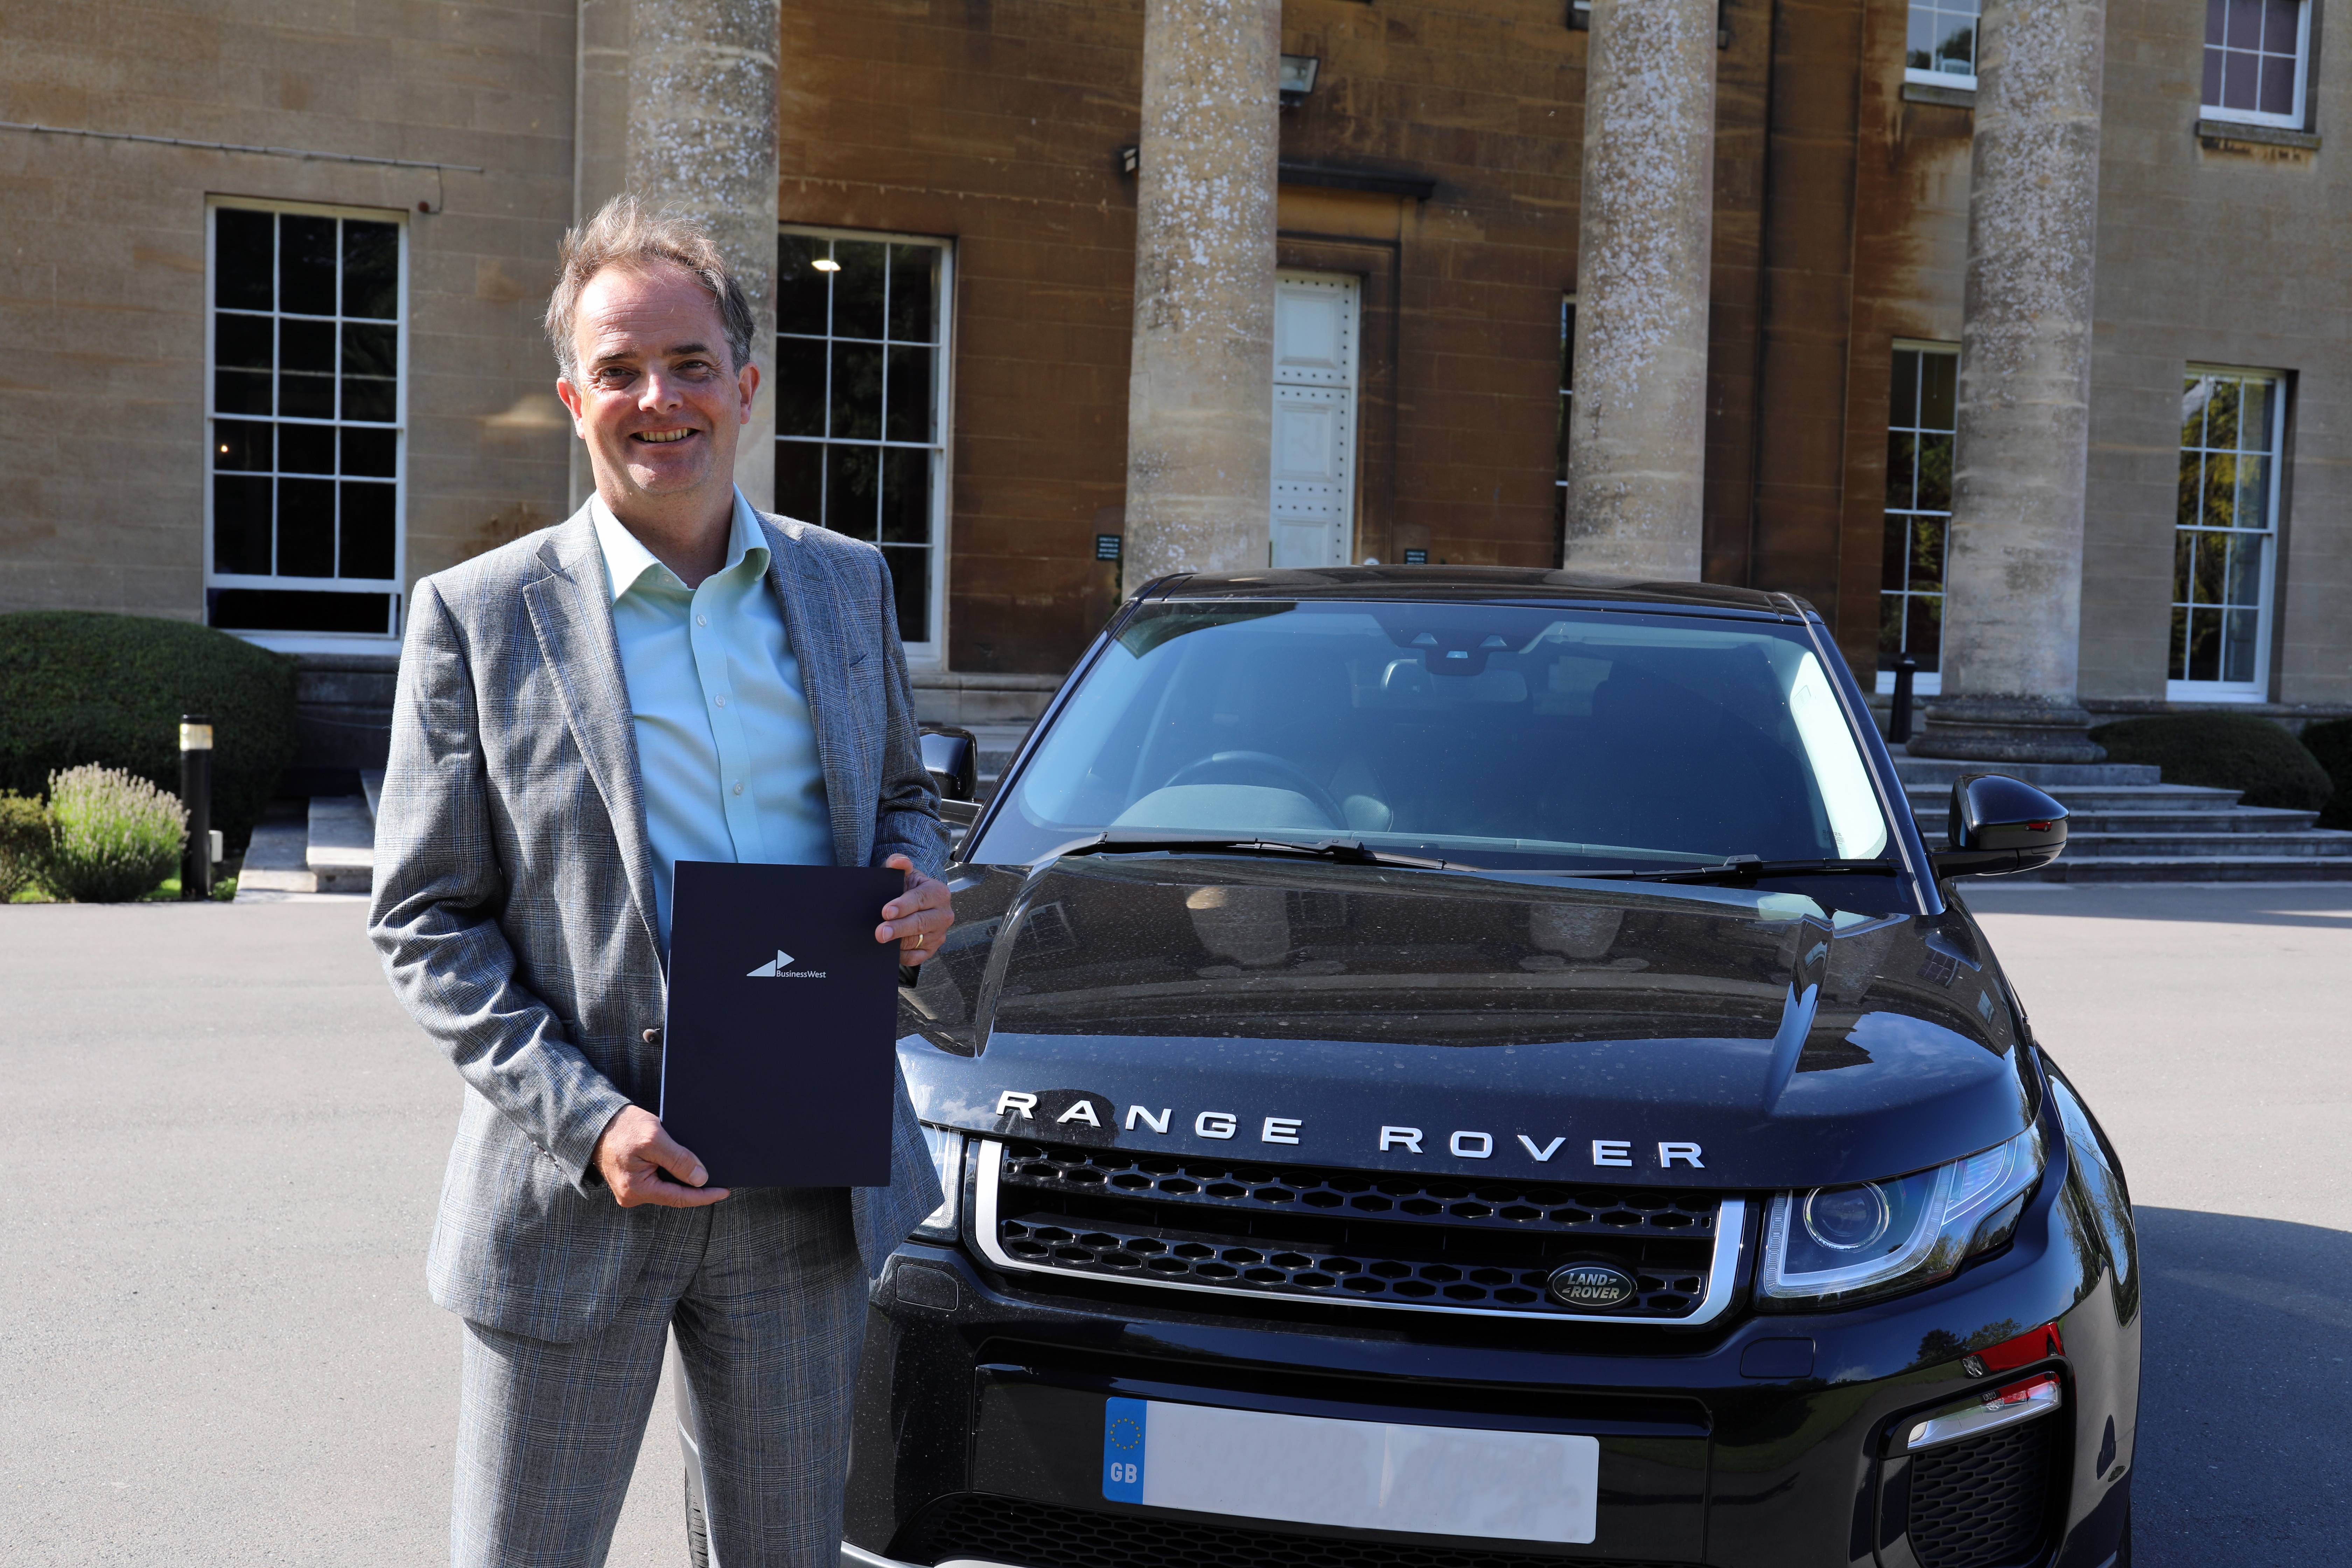 James Monk, Director of International Trade Services at Business West is holding export documentation and is stood by a Range Rover similar to that caught up in the scam